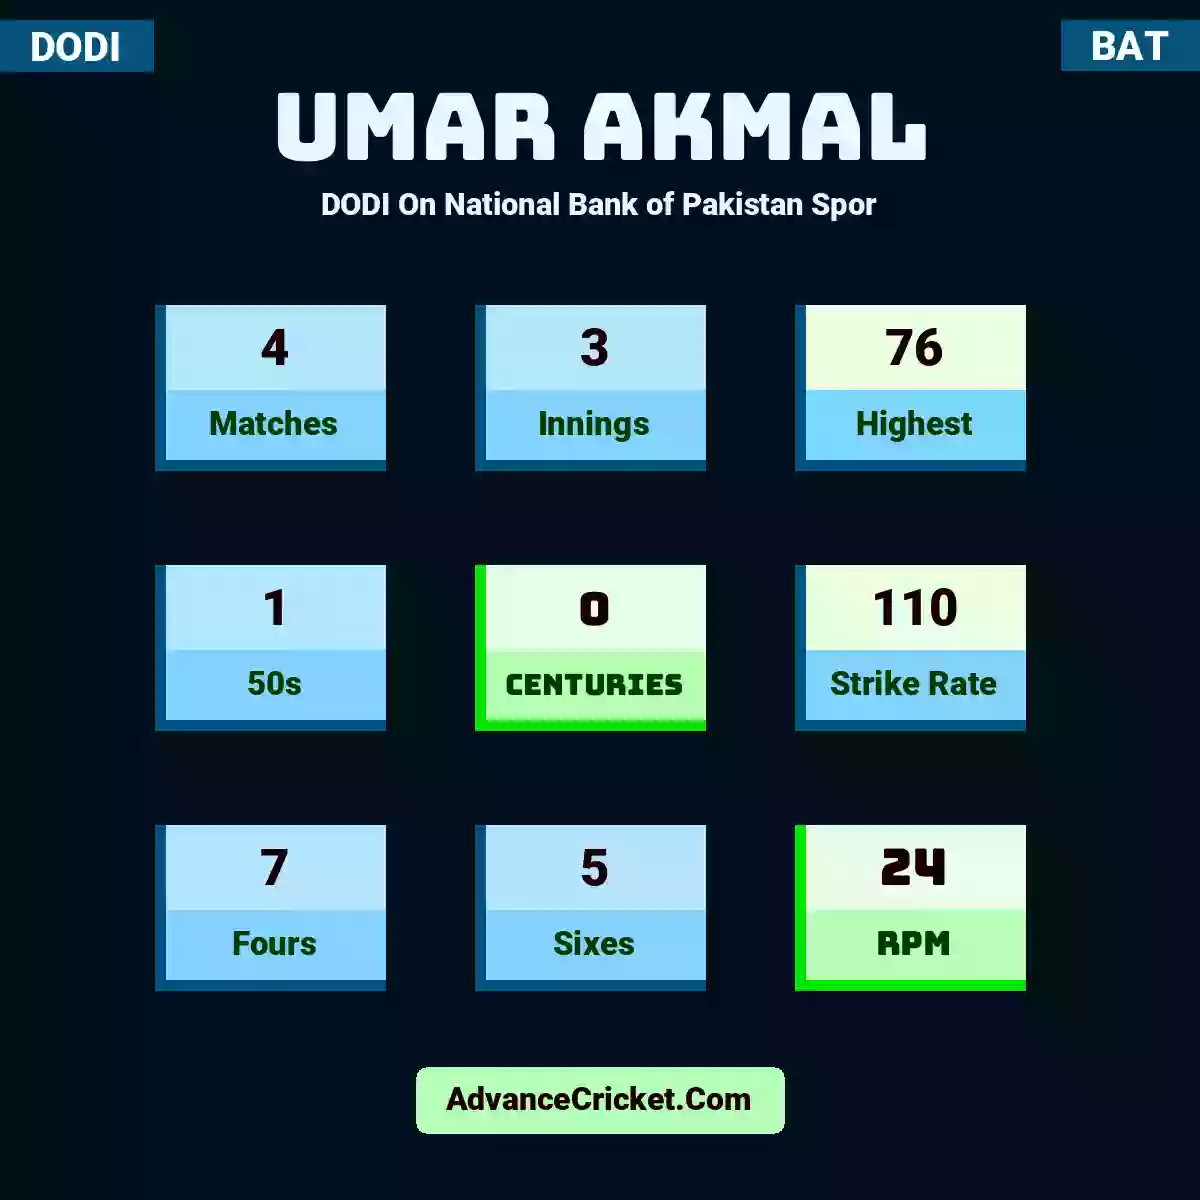 Umar Akmal DODI  On National Bank of Pakistan Spor, Umar Akmal played 4 matches, scored 76 runs as highest, 1 half-centuries, and 0 centuries, with a strike rate of 110. U.Akmal hit 7 fours and 5 sixes, with an RPM of 24.